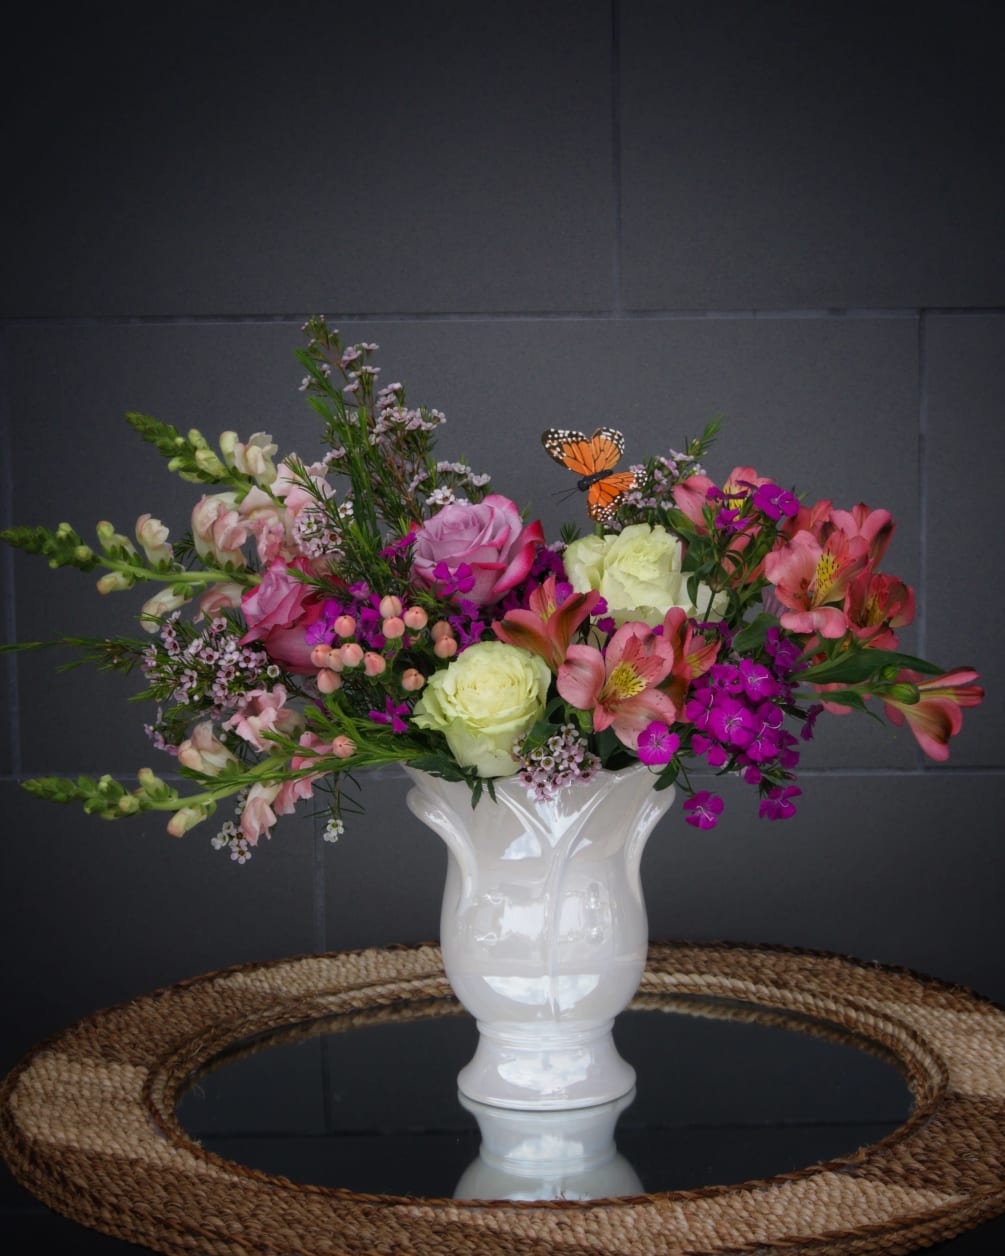 Lovely design including rose, snapdragon, sweet william, astroemeria and accents in a